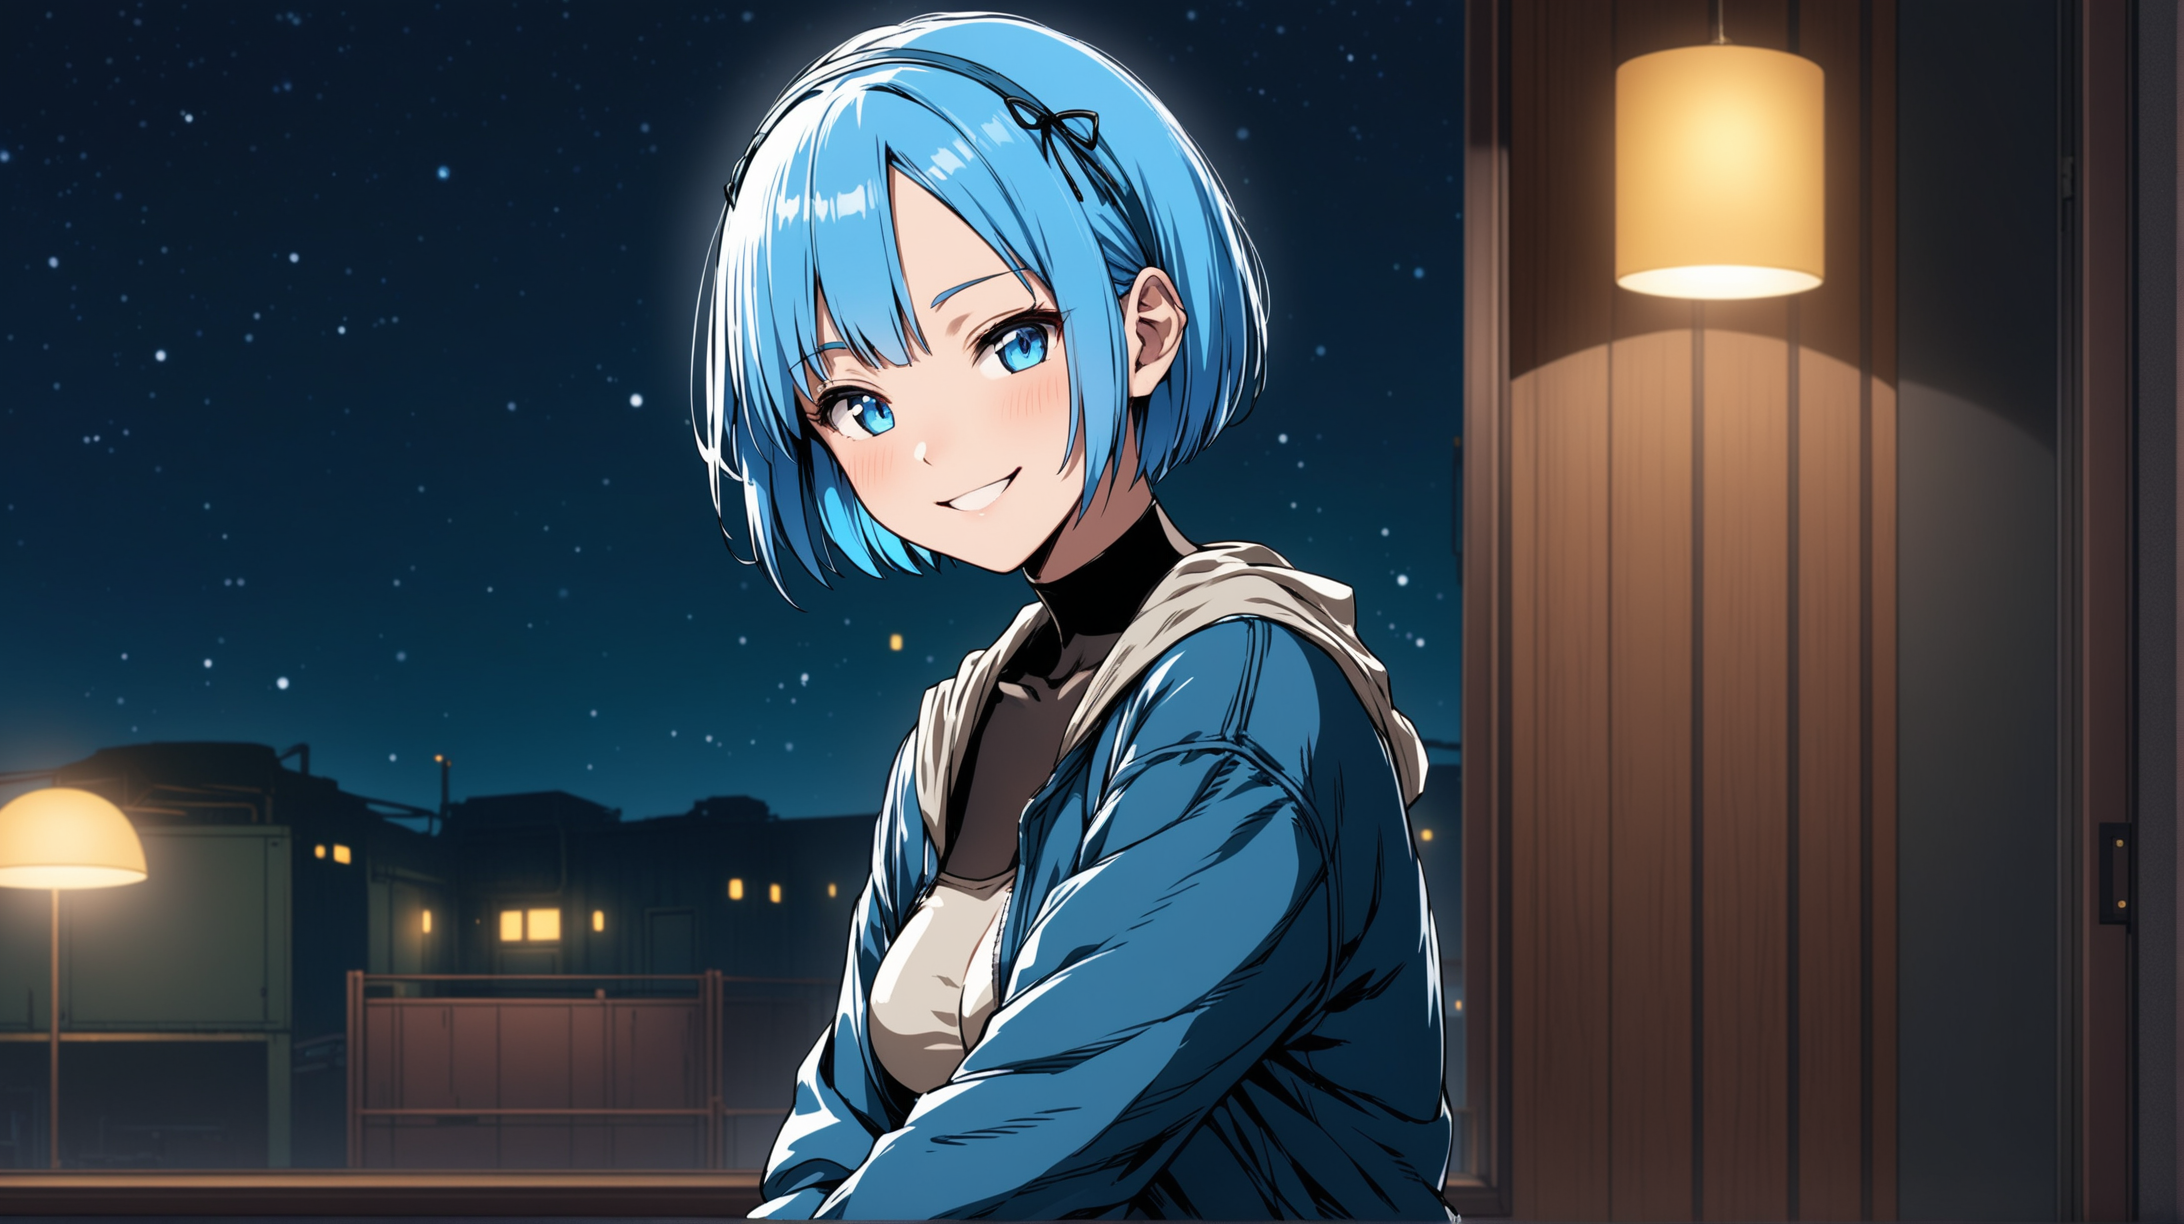 Rem in FalloutInspired Attire Relaxing Indoors at Night